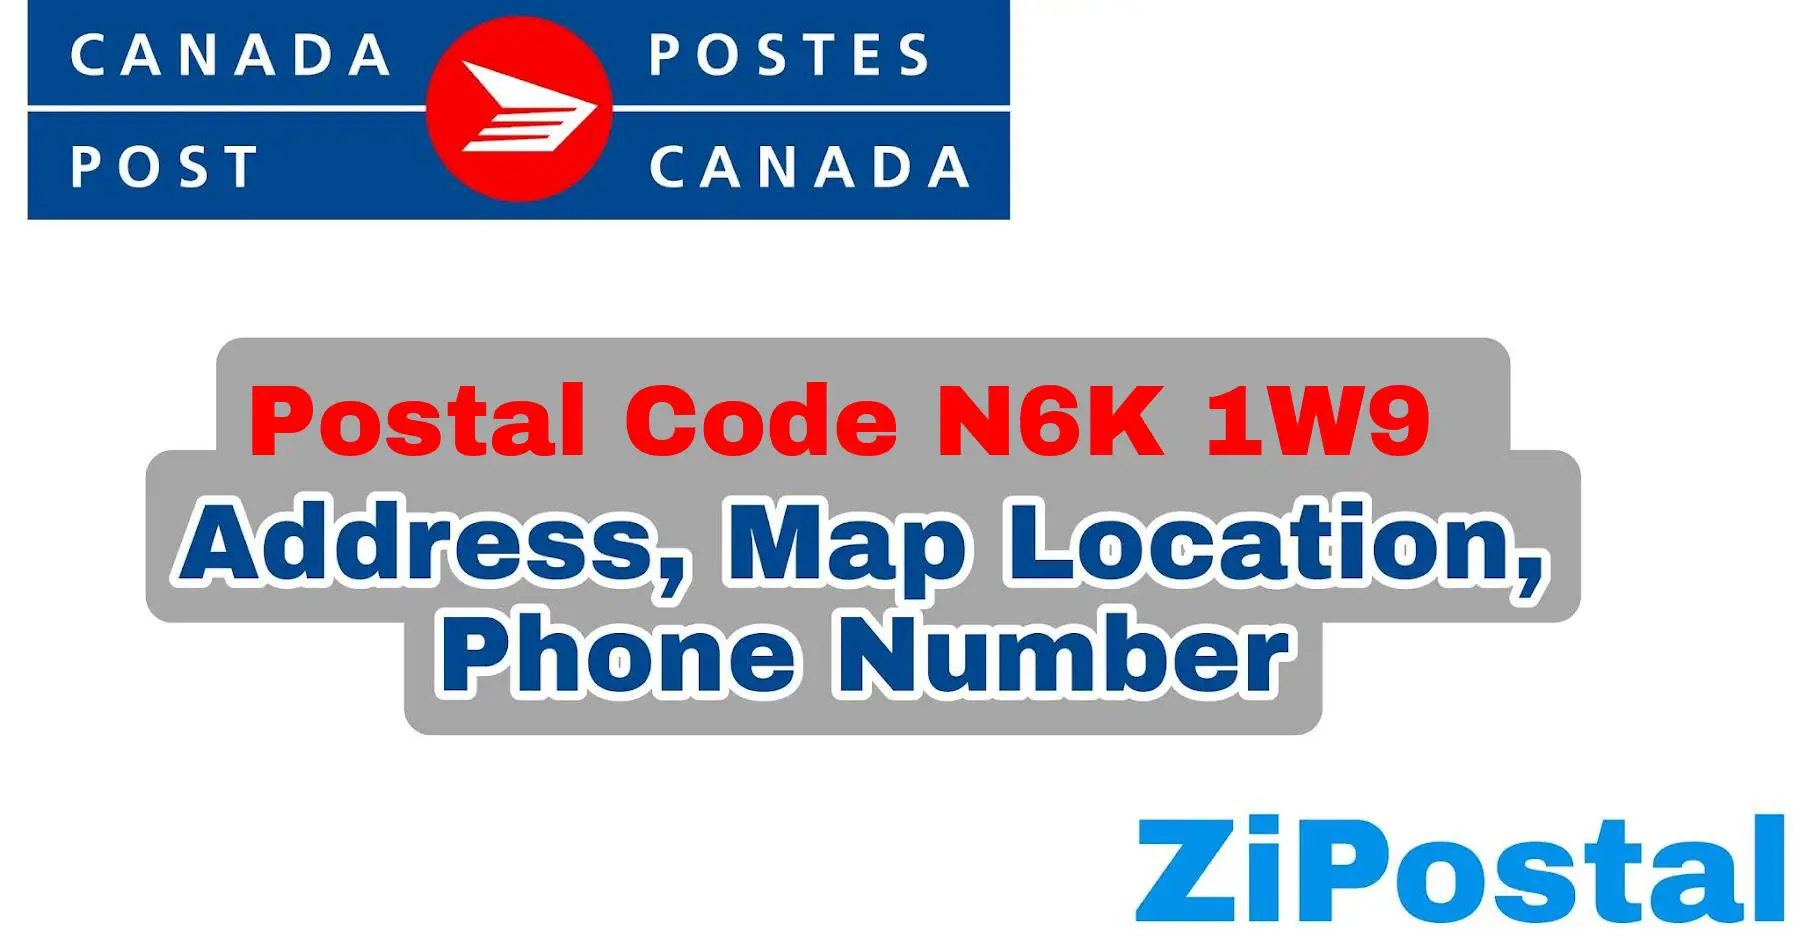 Postal Code N6K 1W9 Address Map Location and Phone Number